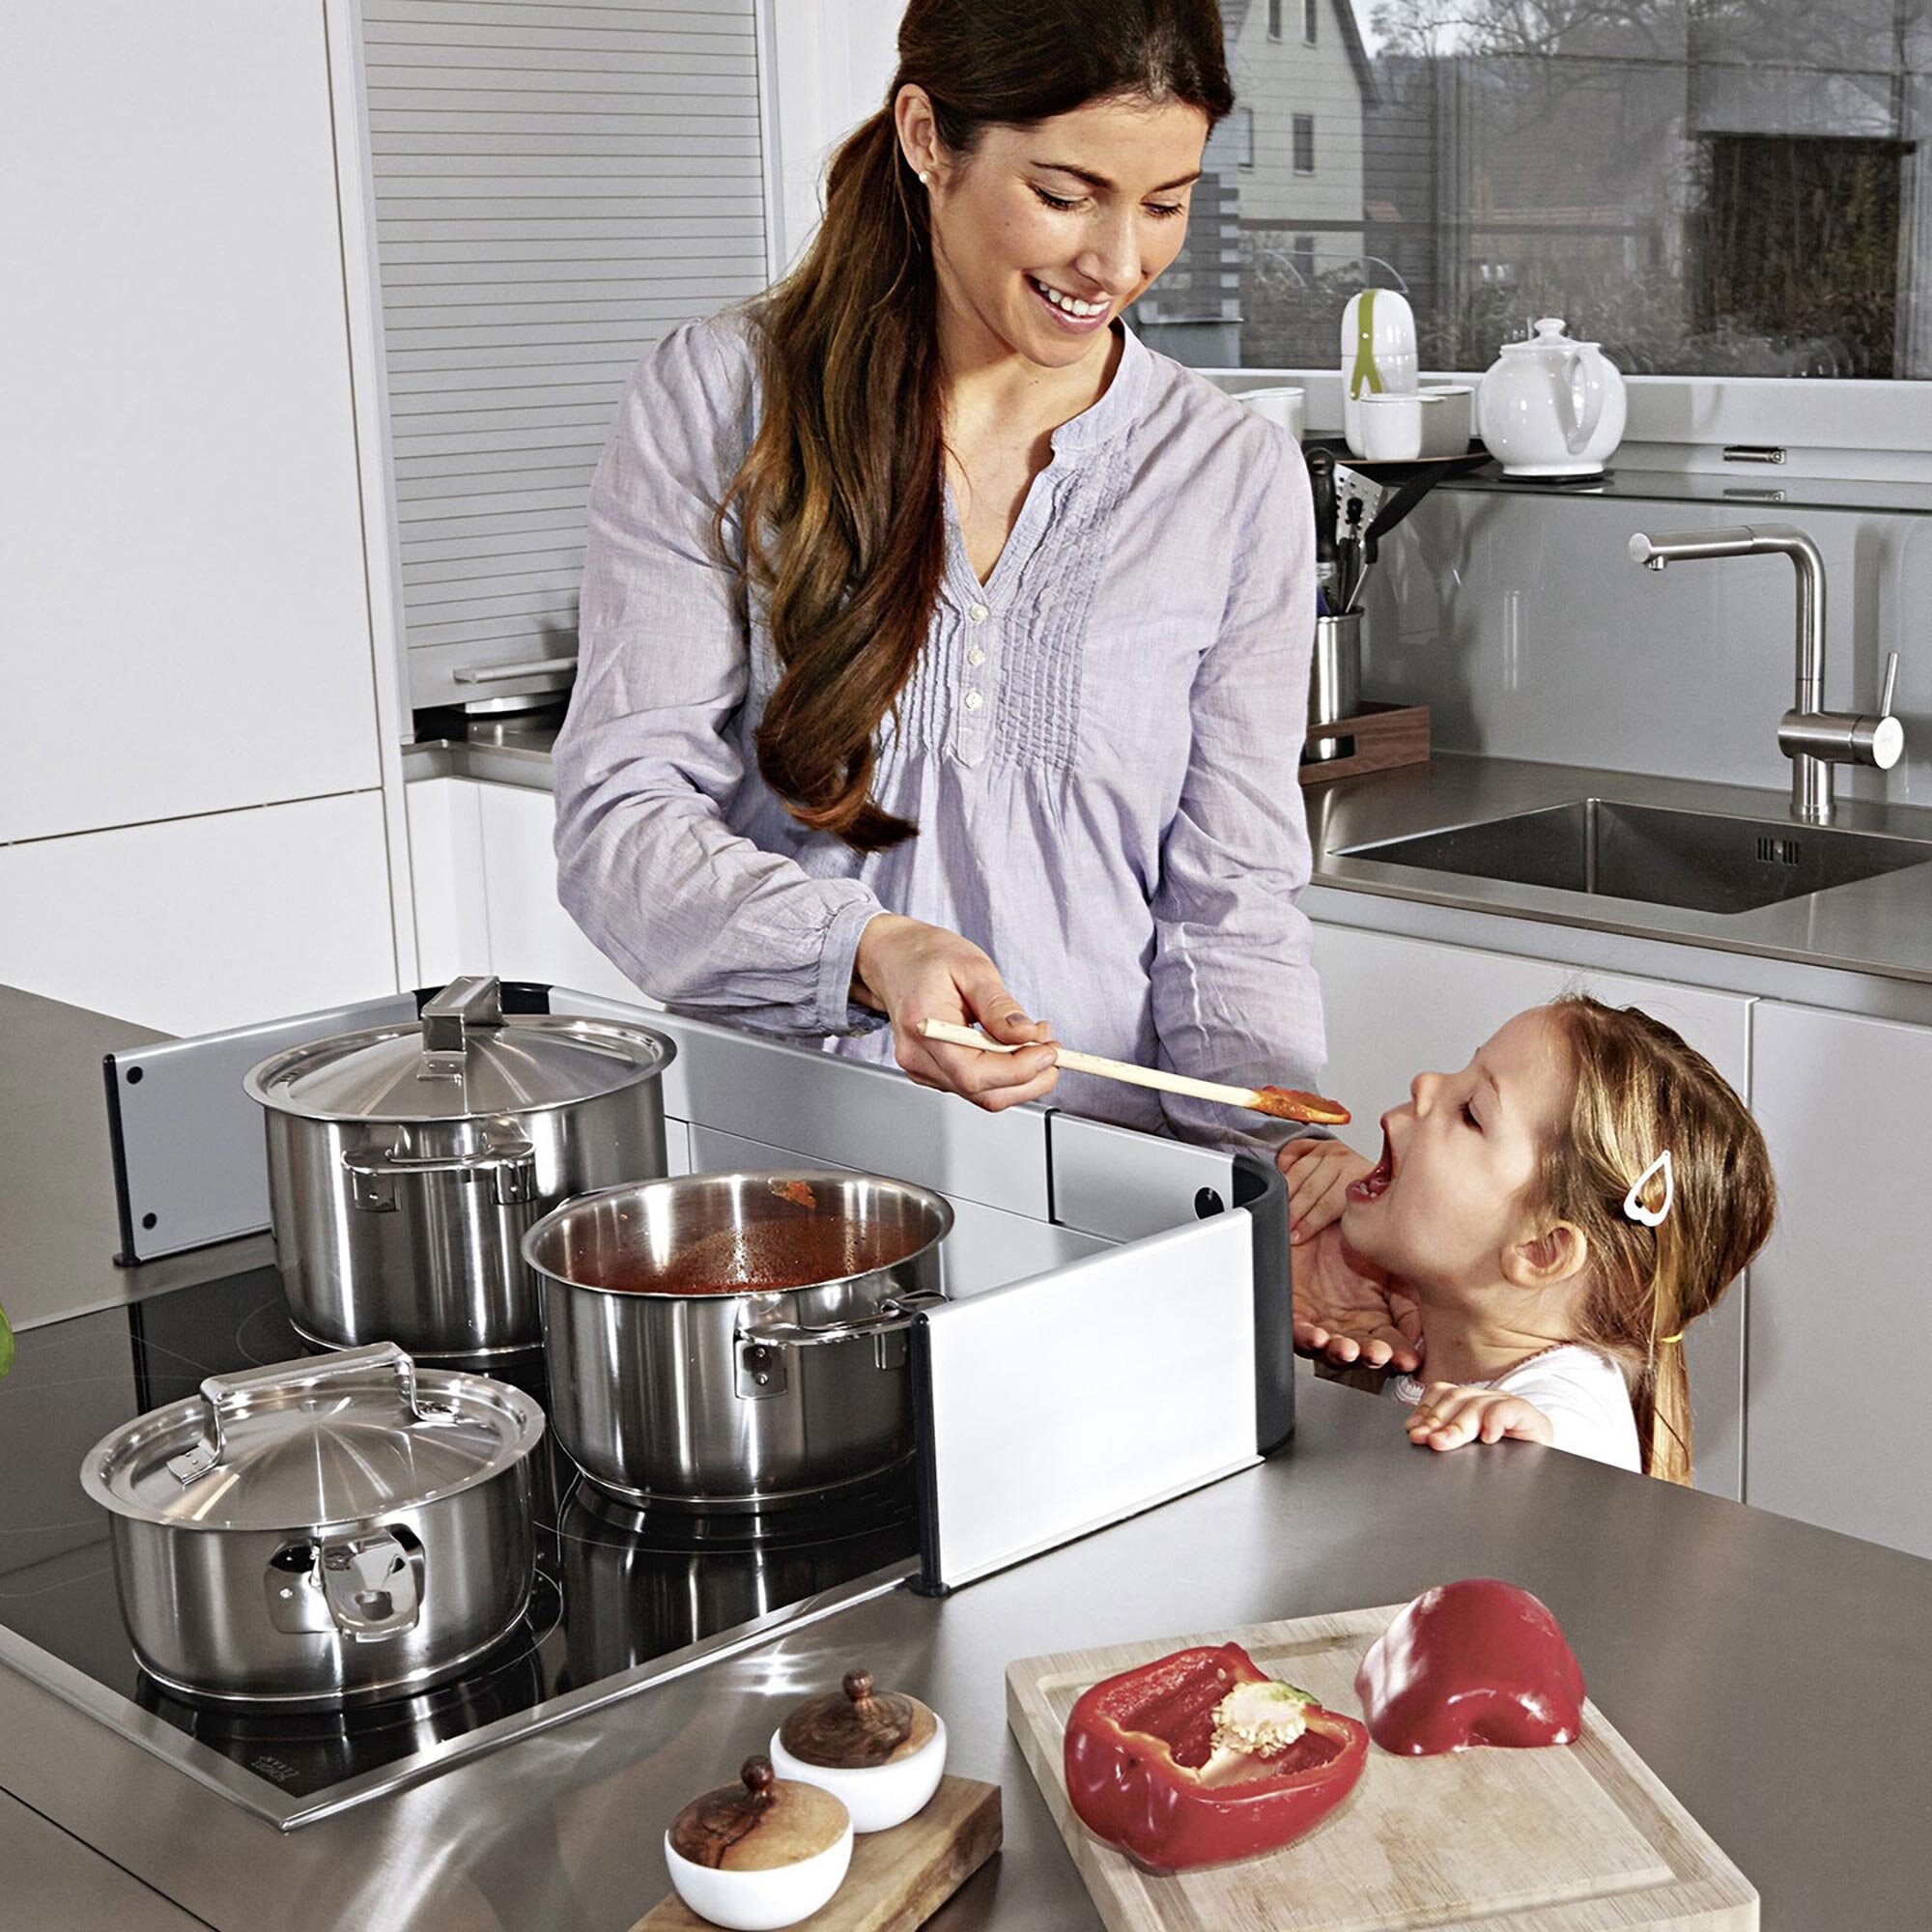 Child being protected by the Adhesive Stove Guard while tasting food